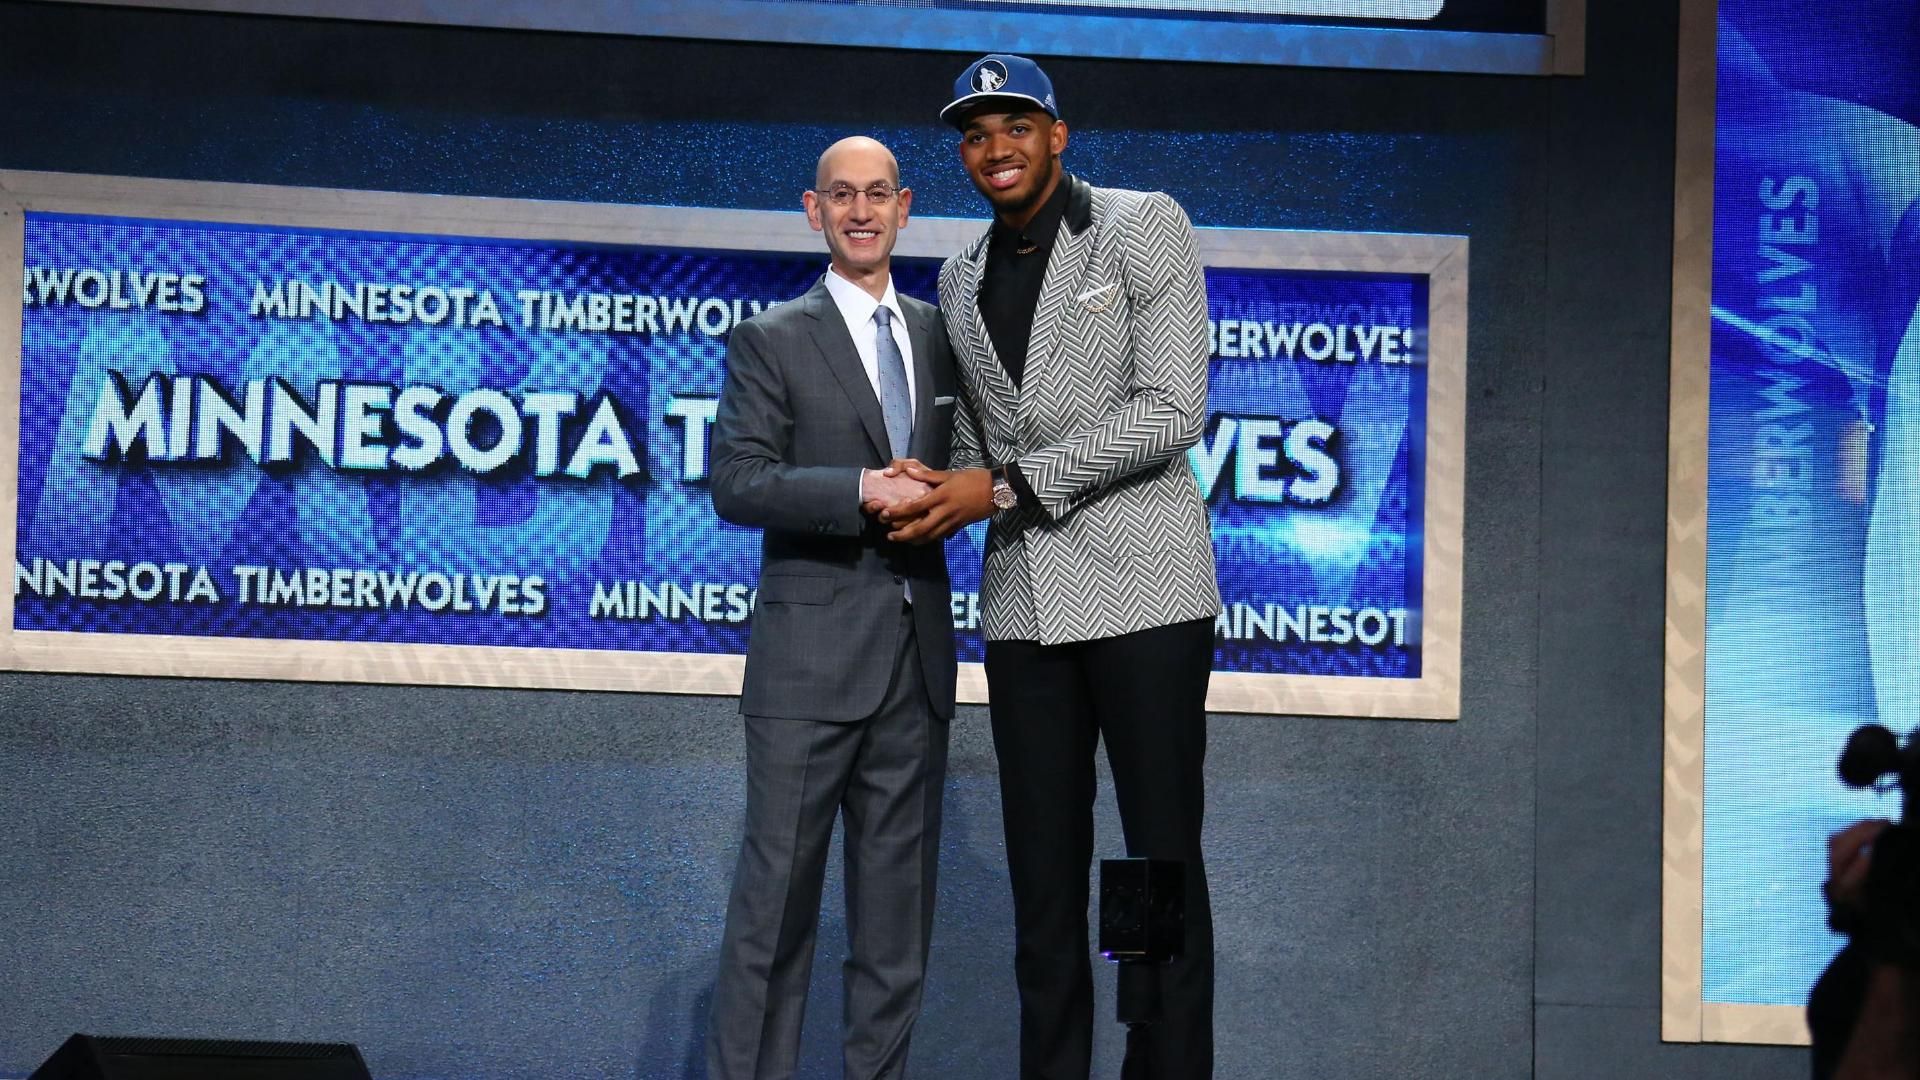 Timberwolves select KarlAnthony Towns No. 1 overall in NBA draft